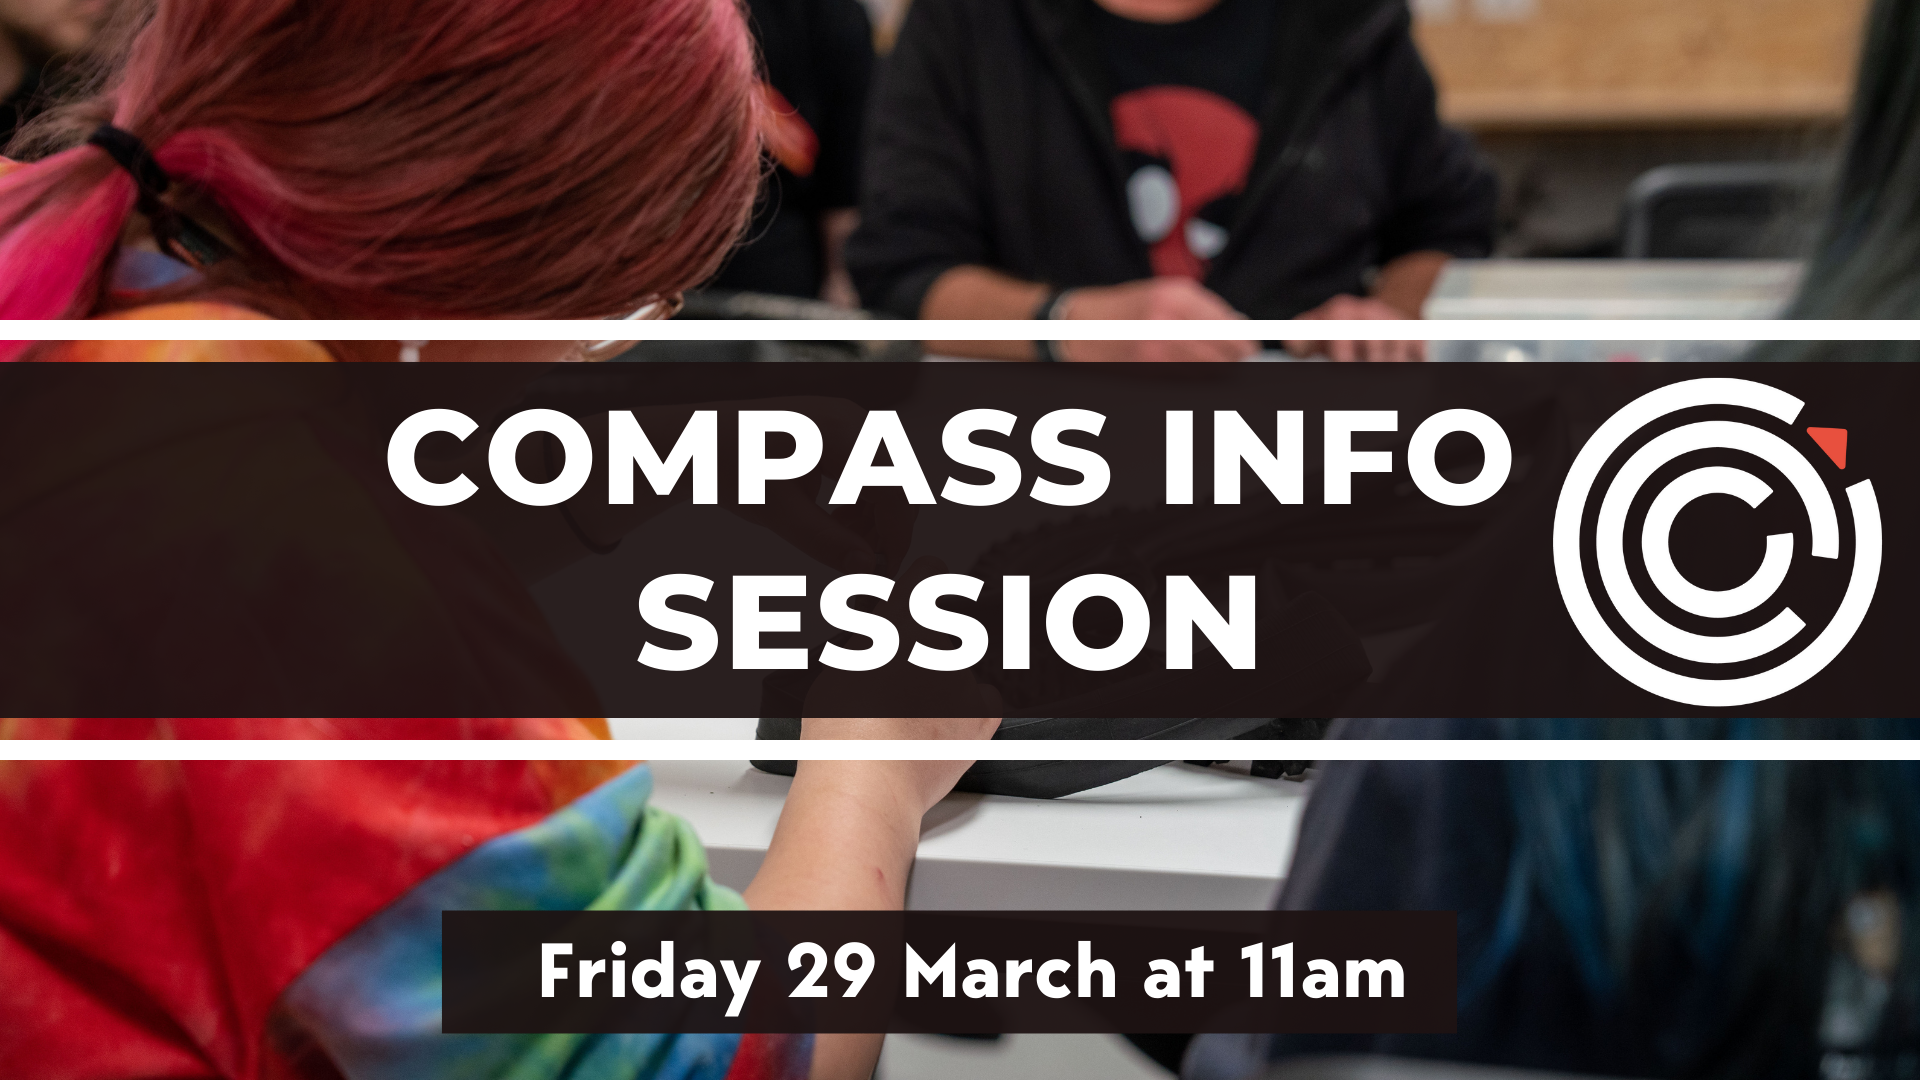 Compass Info Session - Friday 29 March